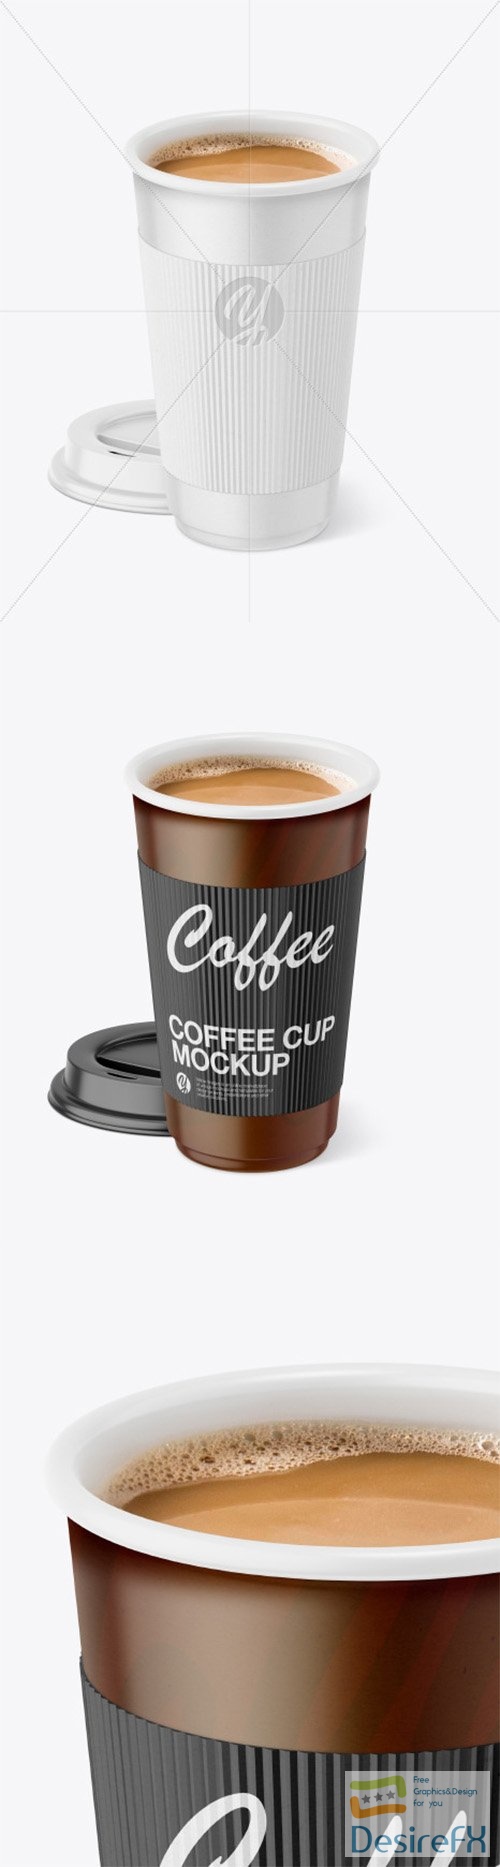 Paper Coffee Cup With Holder Mockup 78493 TIF